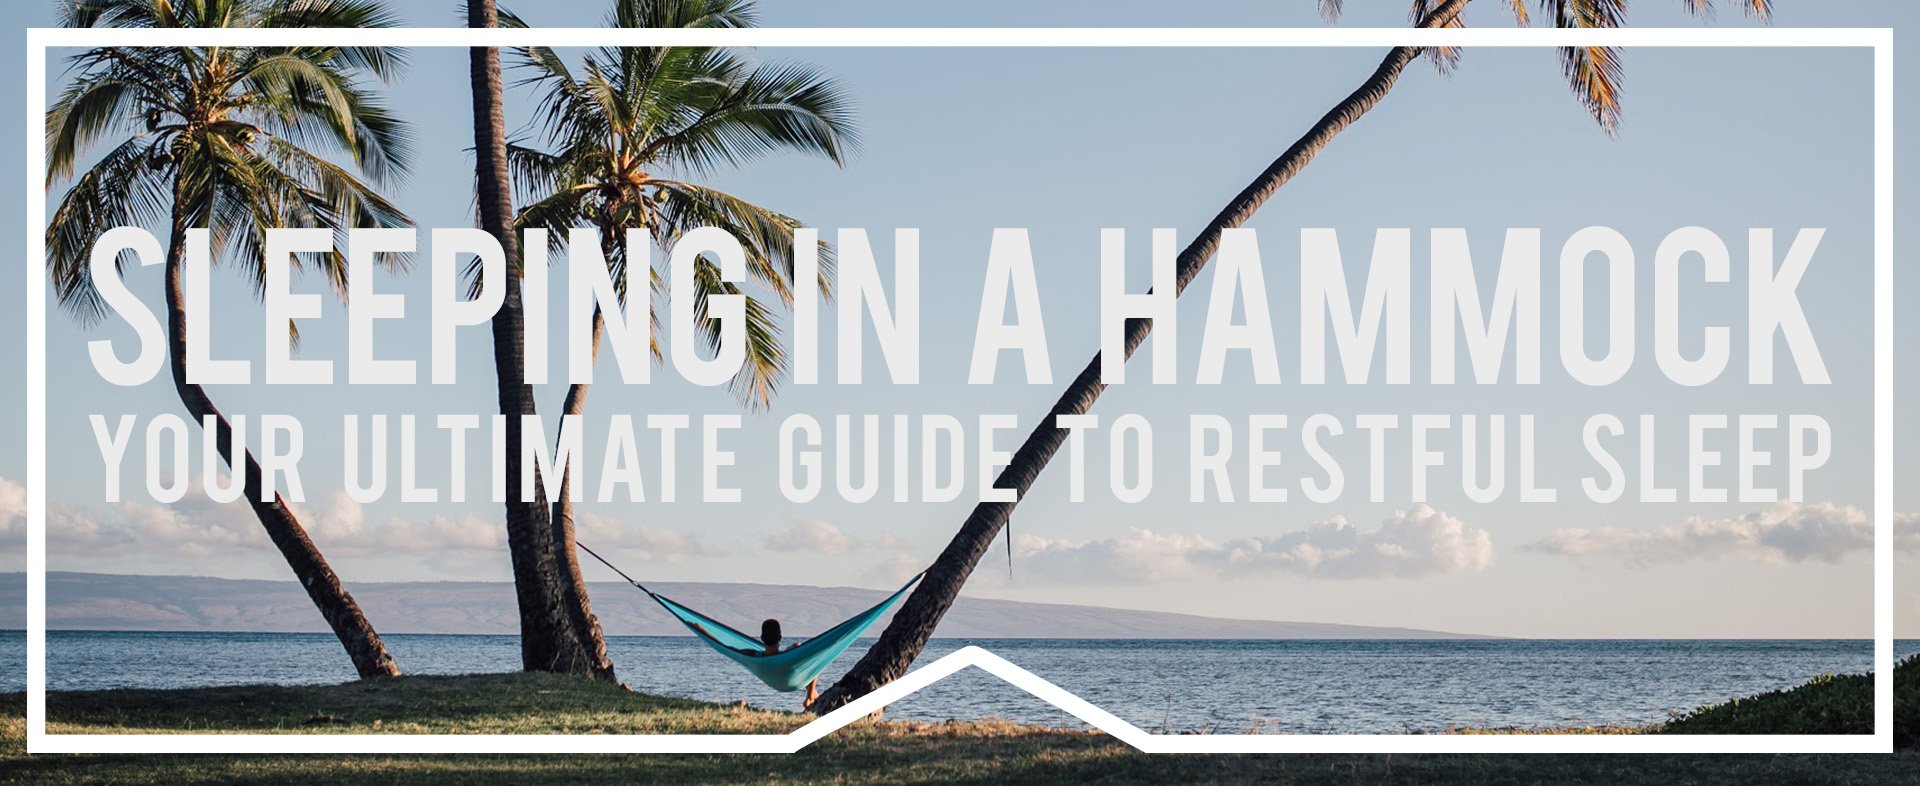 Sleeping in a Hammock - Your Ultimate Guide to Restful Sleep